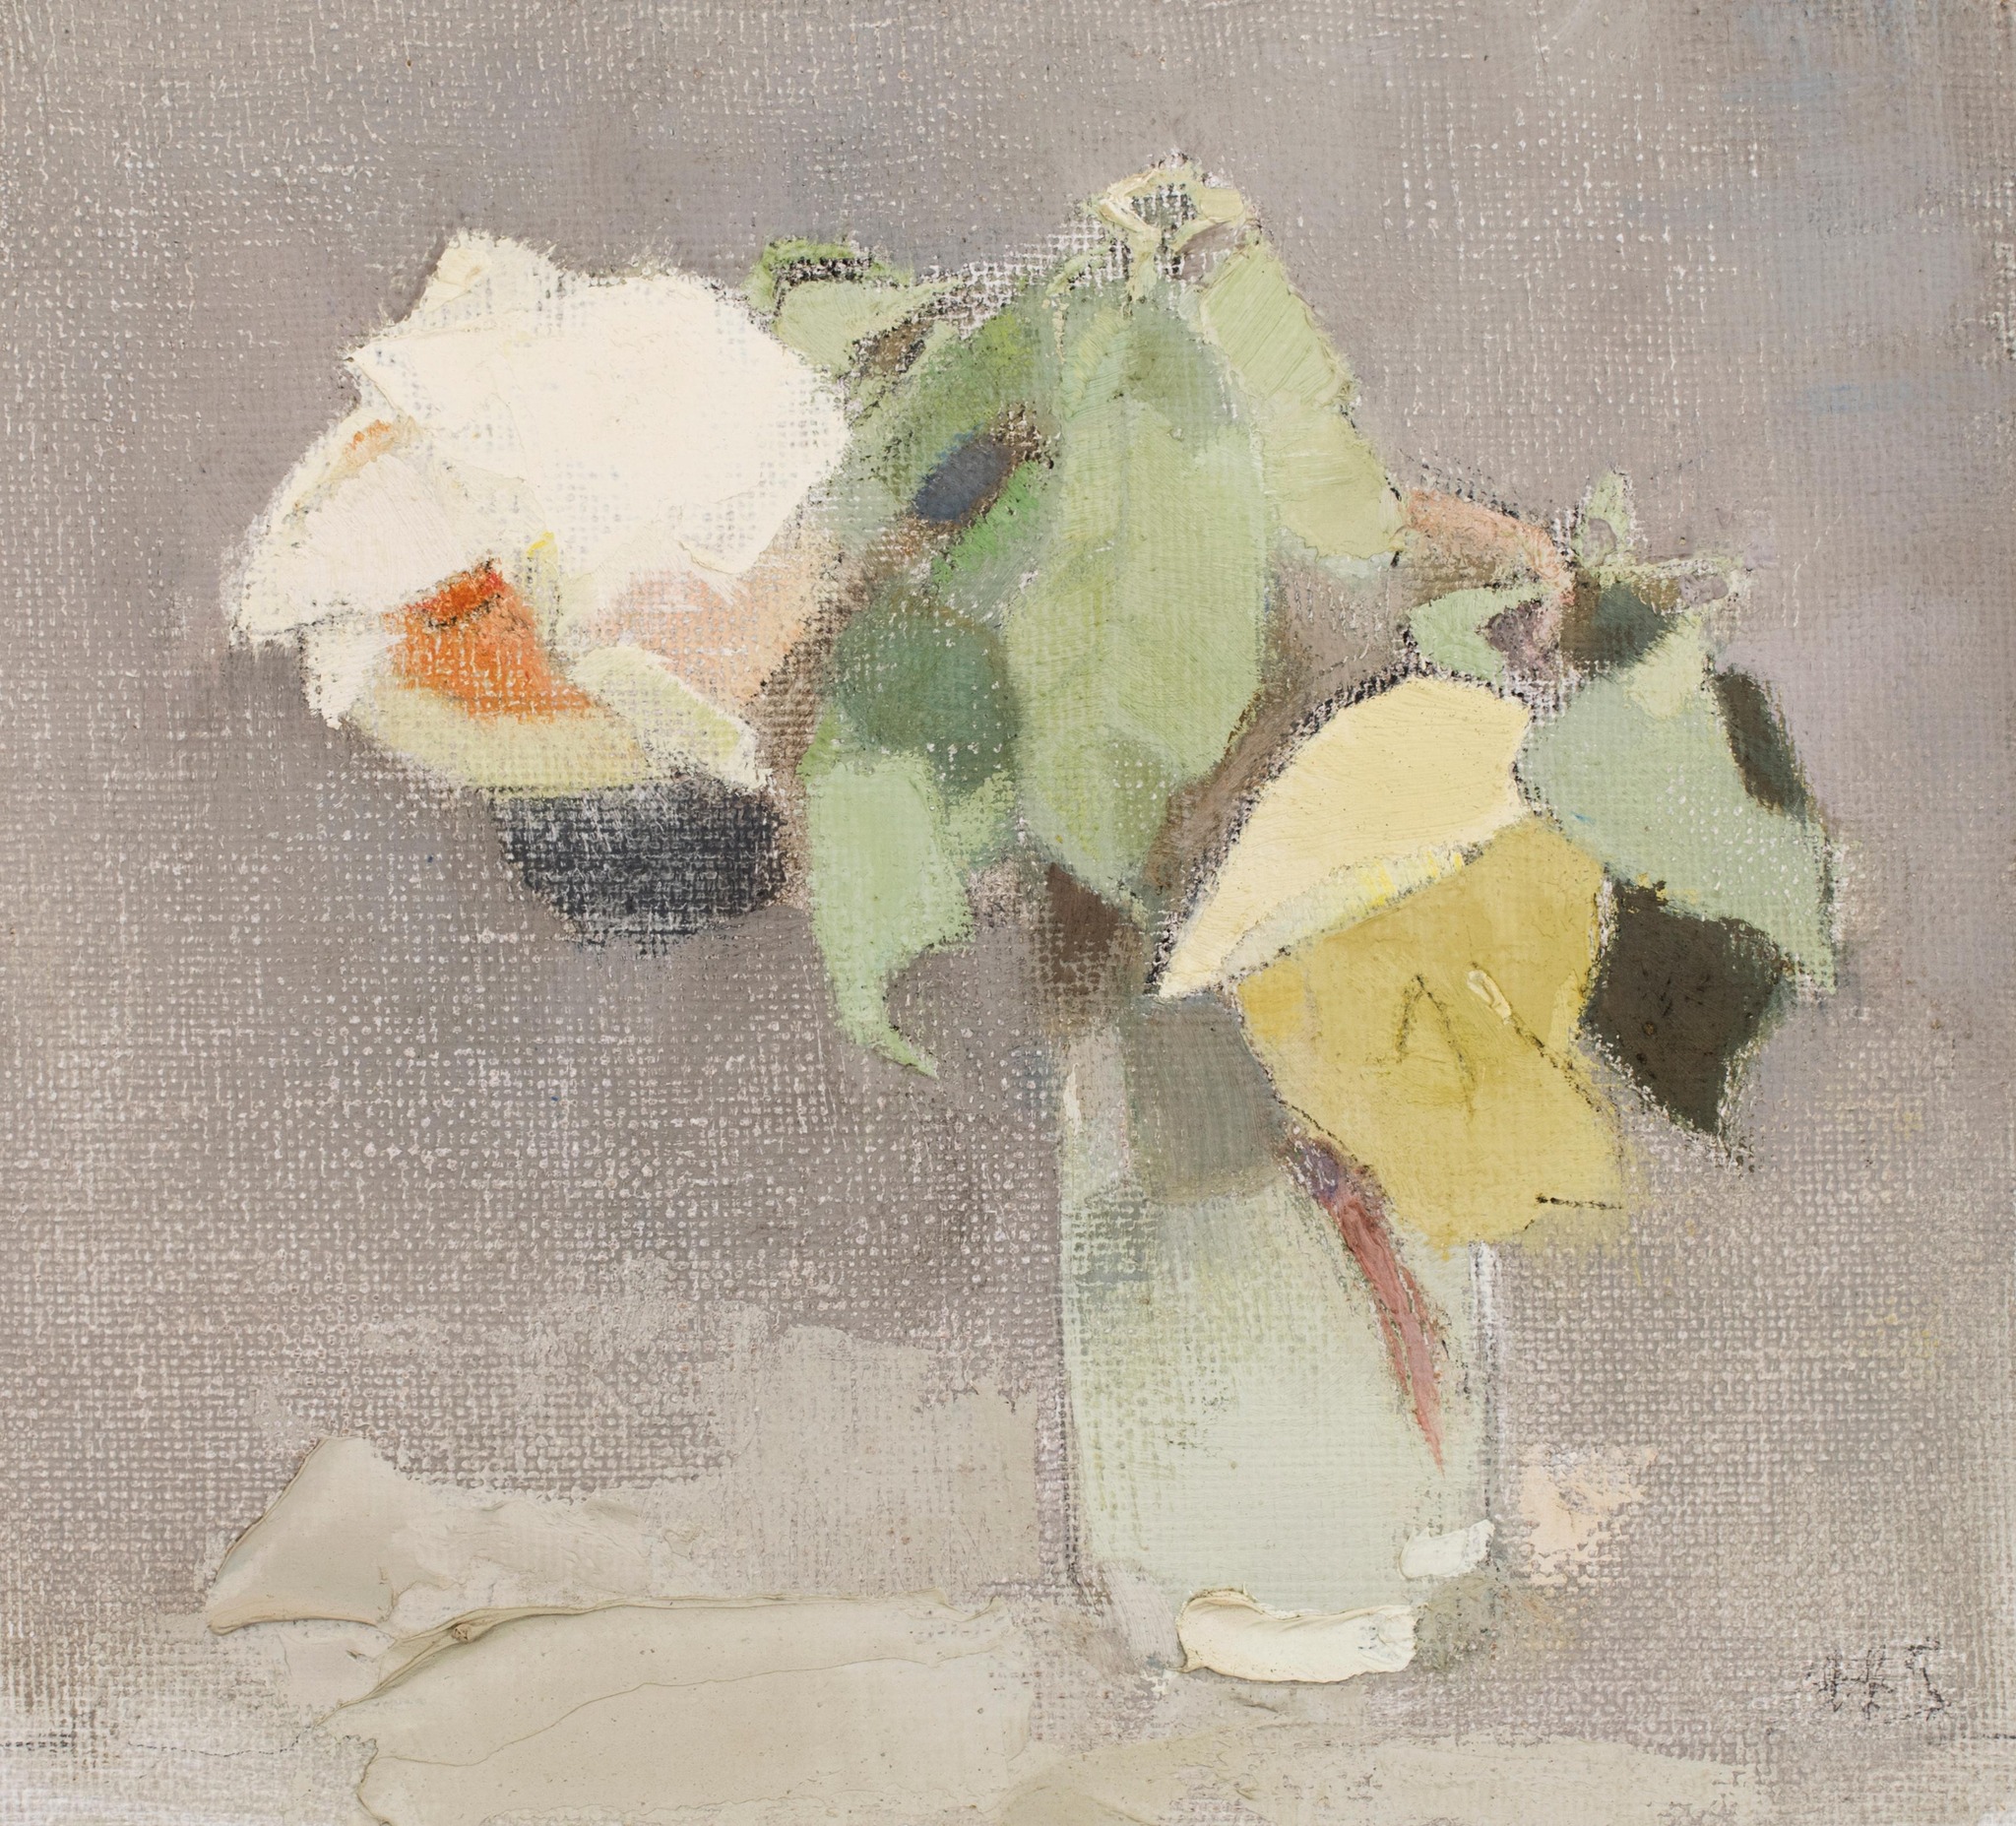 Yellow Roses by Helene Schjerfbeck - 1942 - 24.5 x 26.5 cm private collection